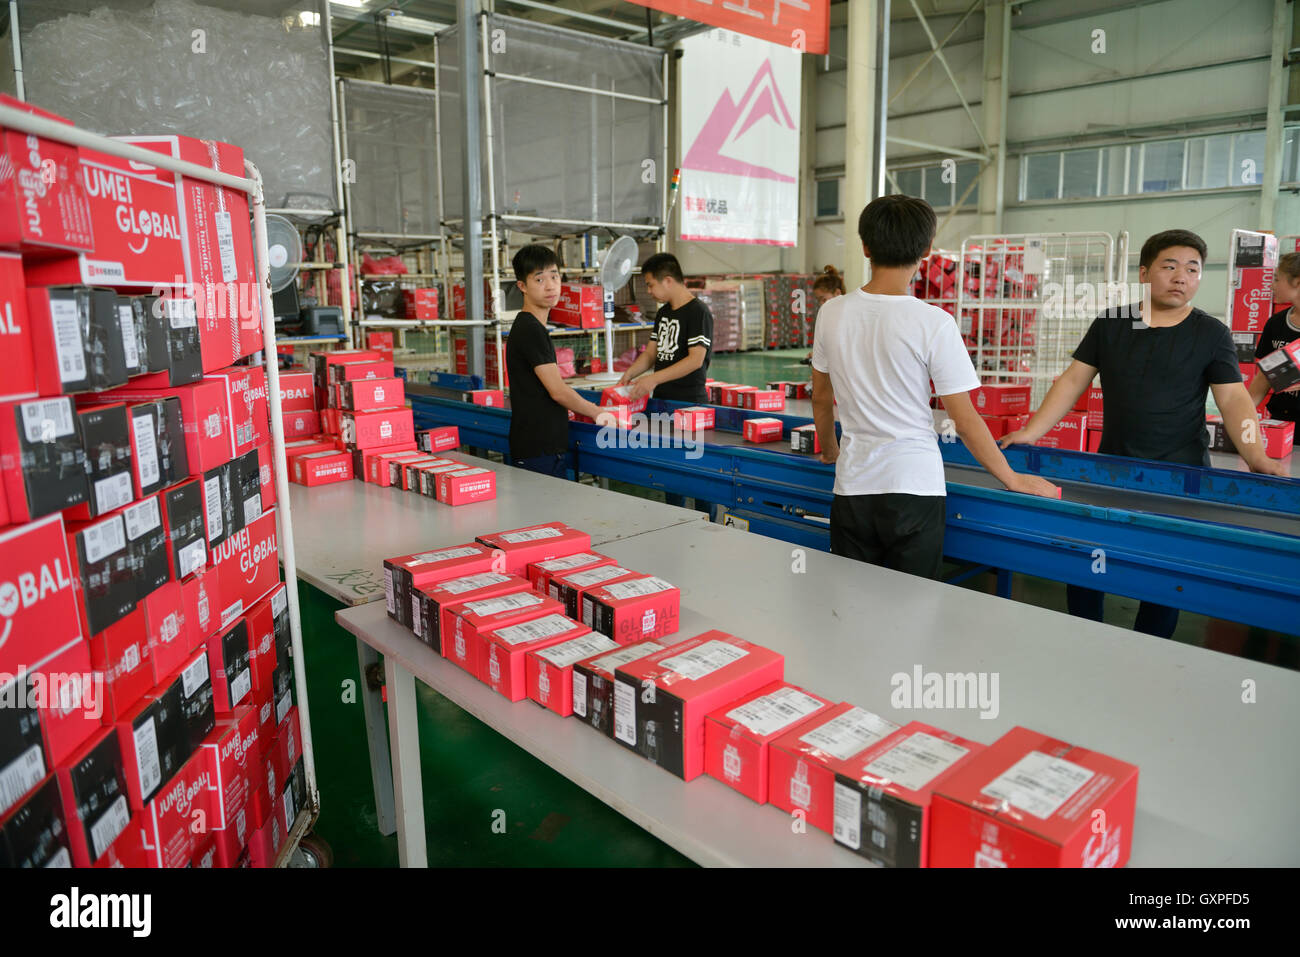 Staff checks goods shopped from overseas through Jumei Global online channel during delivery at EHL International Logistics Stock Photo